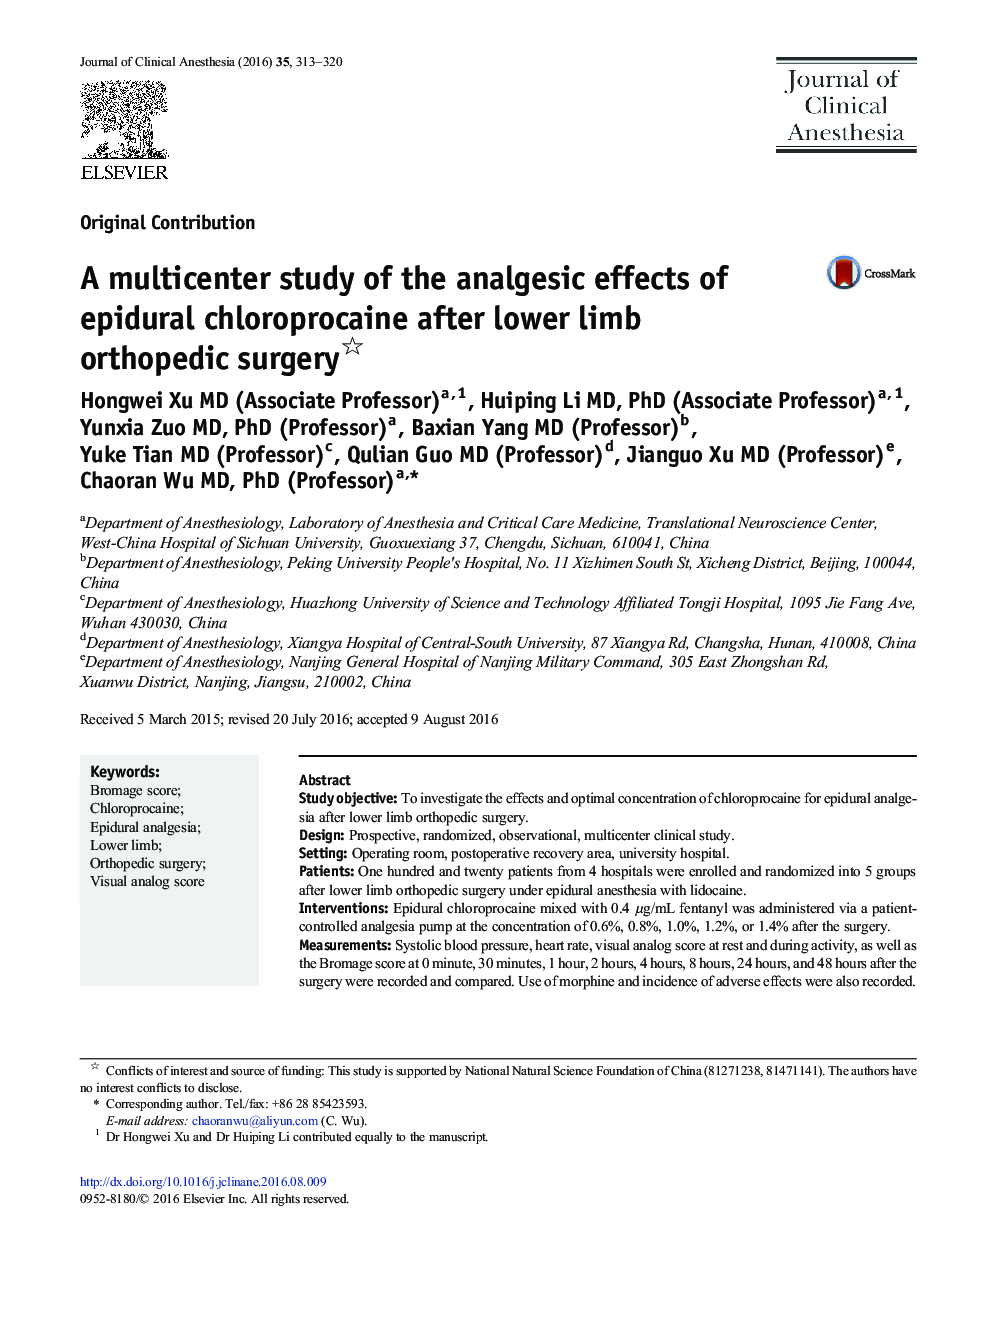 A multicenter study of the analgesic effects of epidural chloroprocaine after lower limb orthopedic surgery